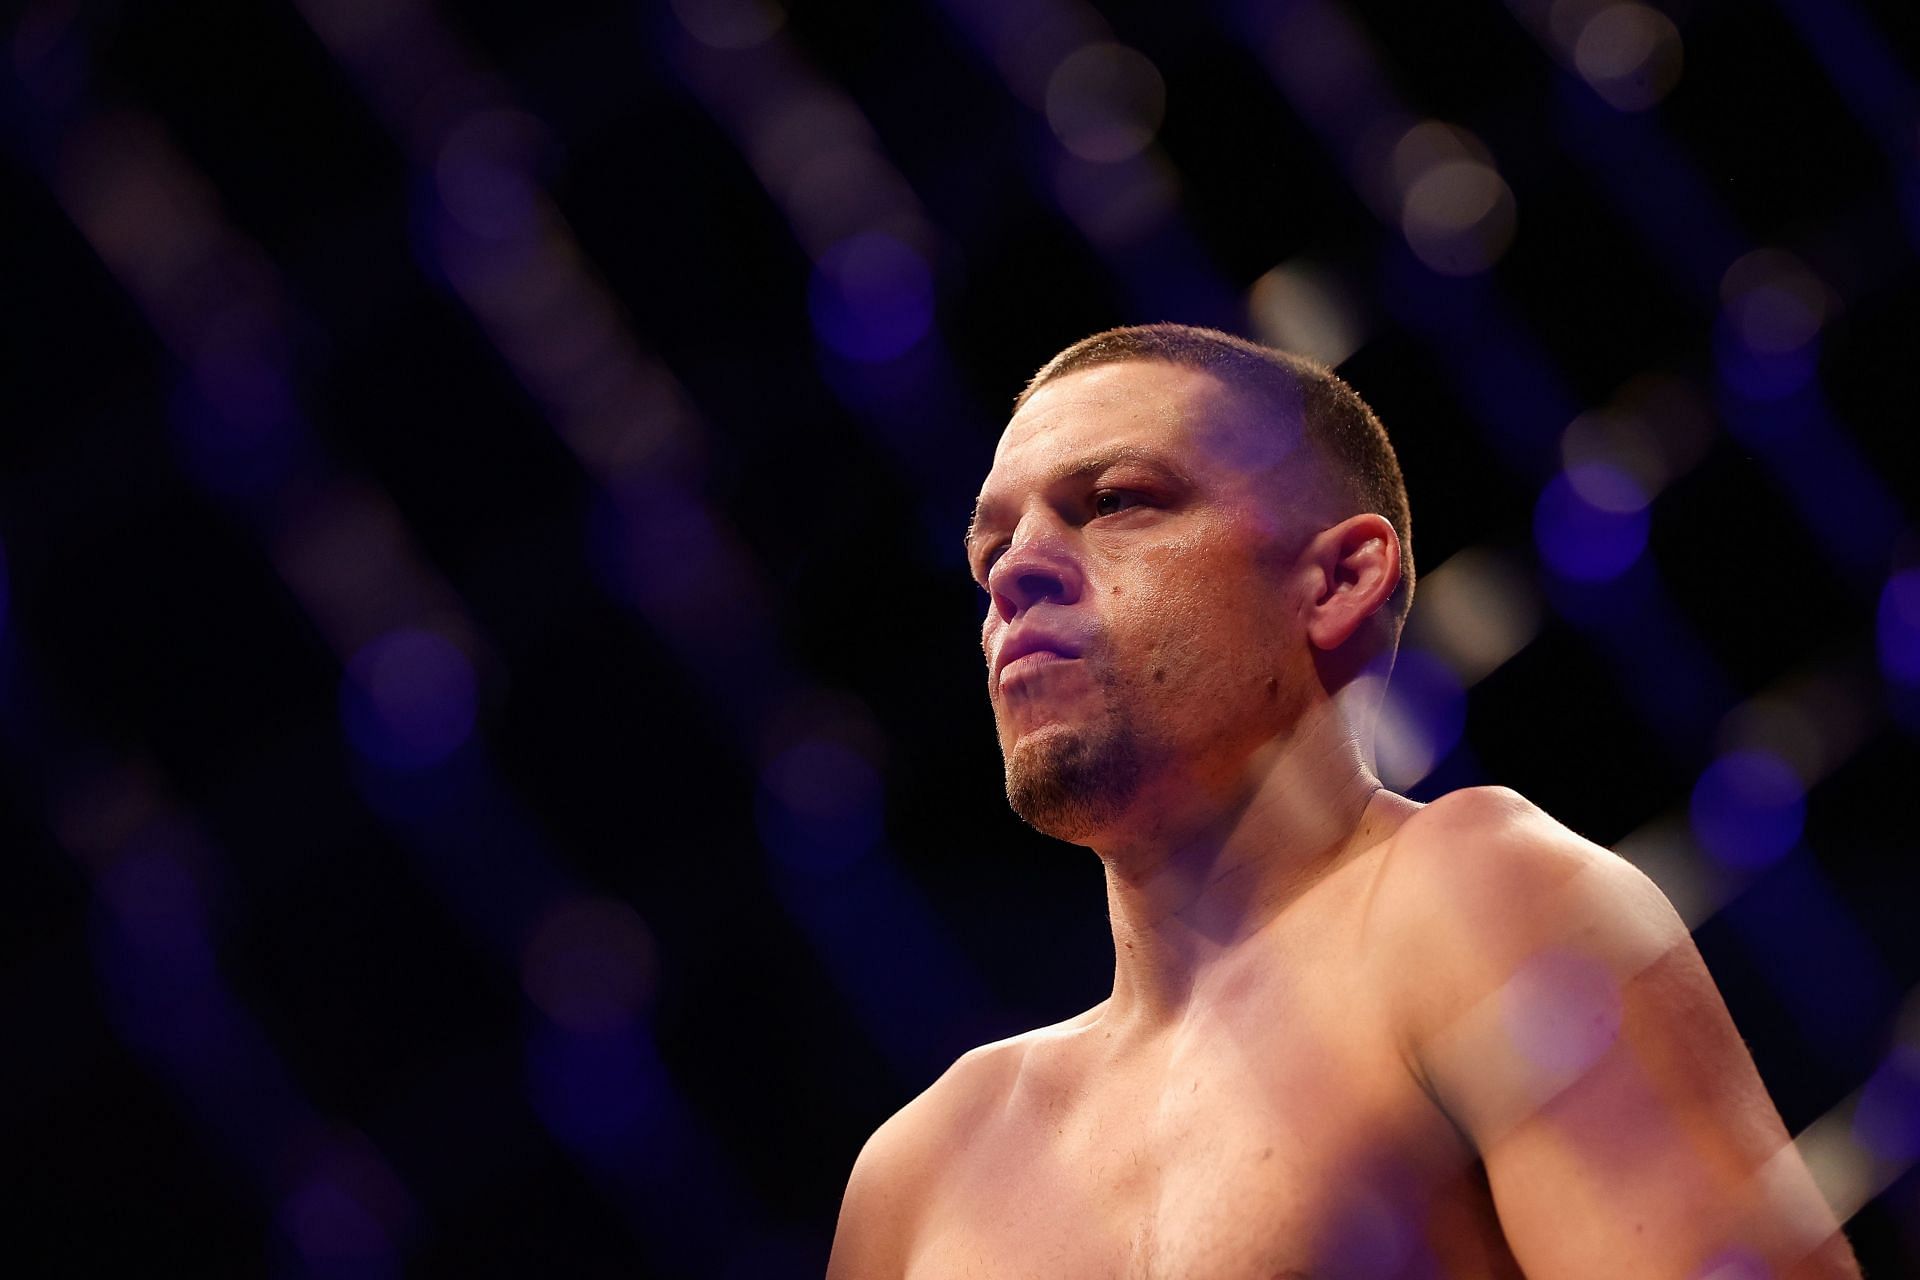 Diaz is 1-3 in his last four fights